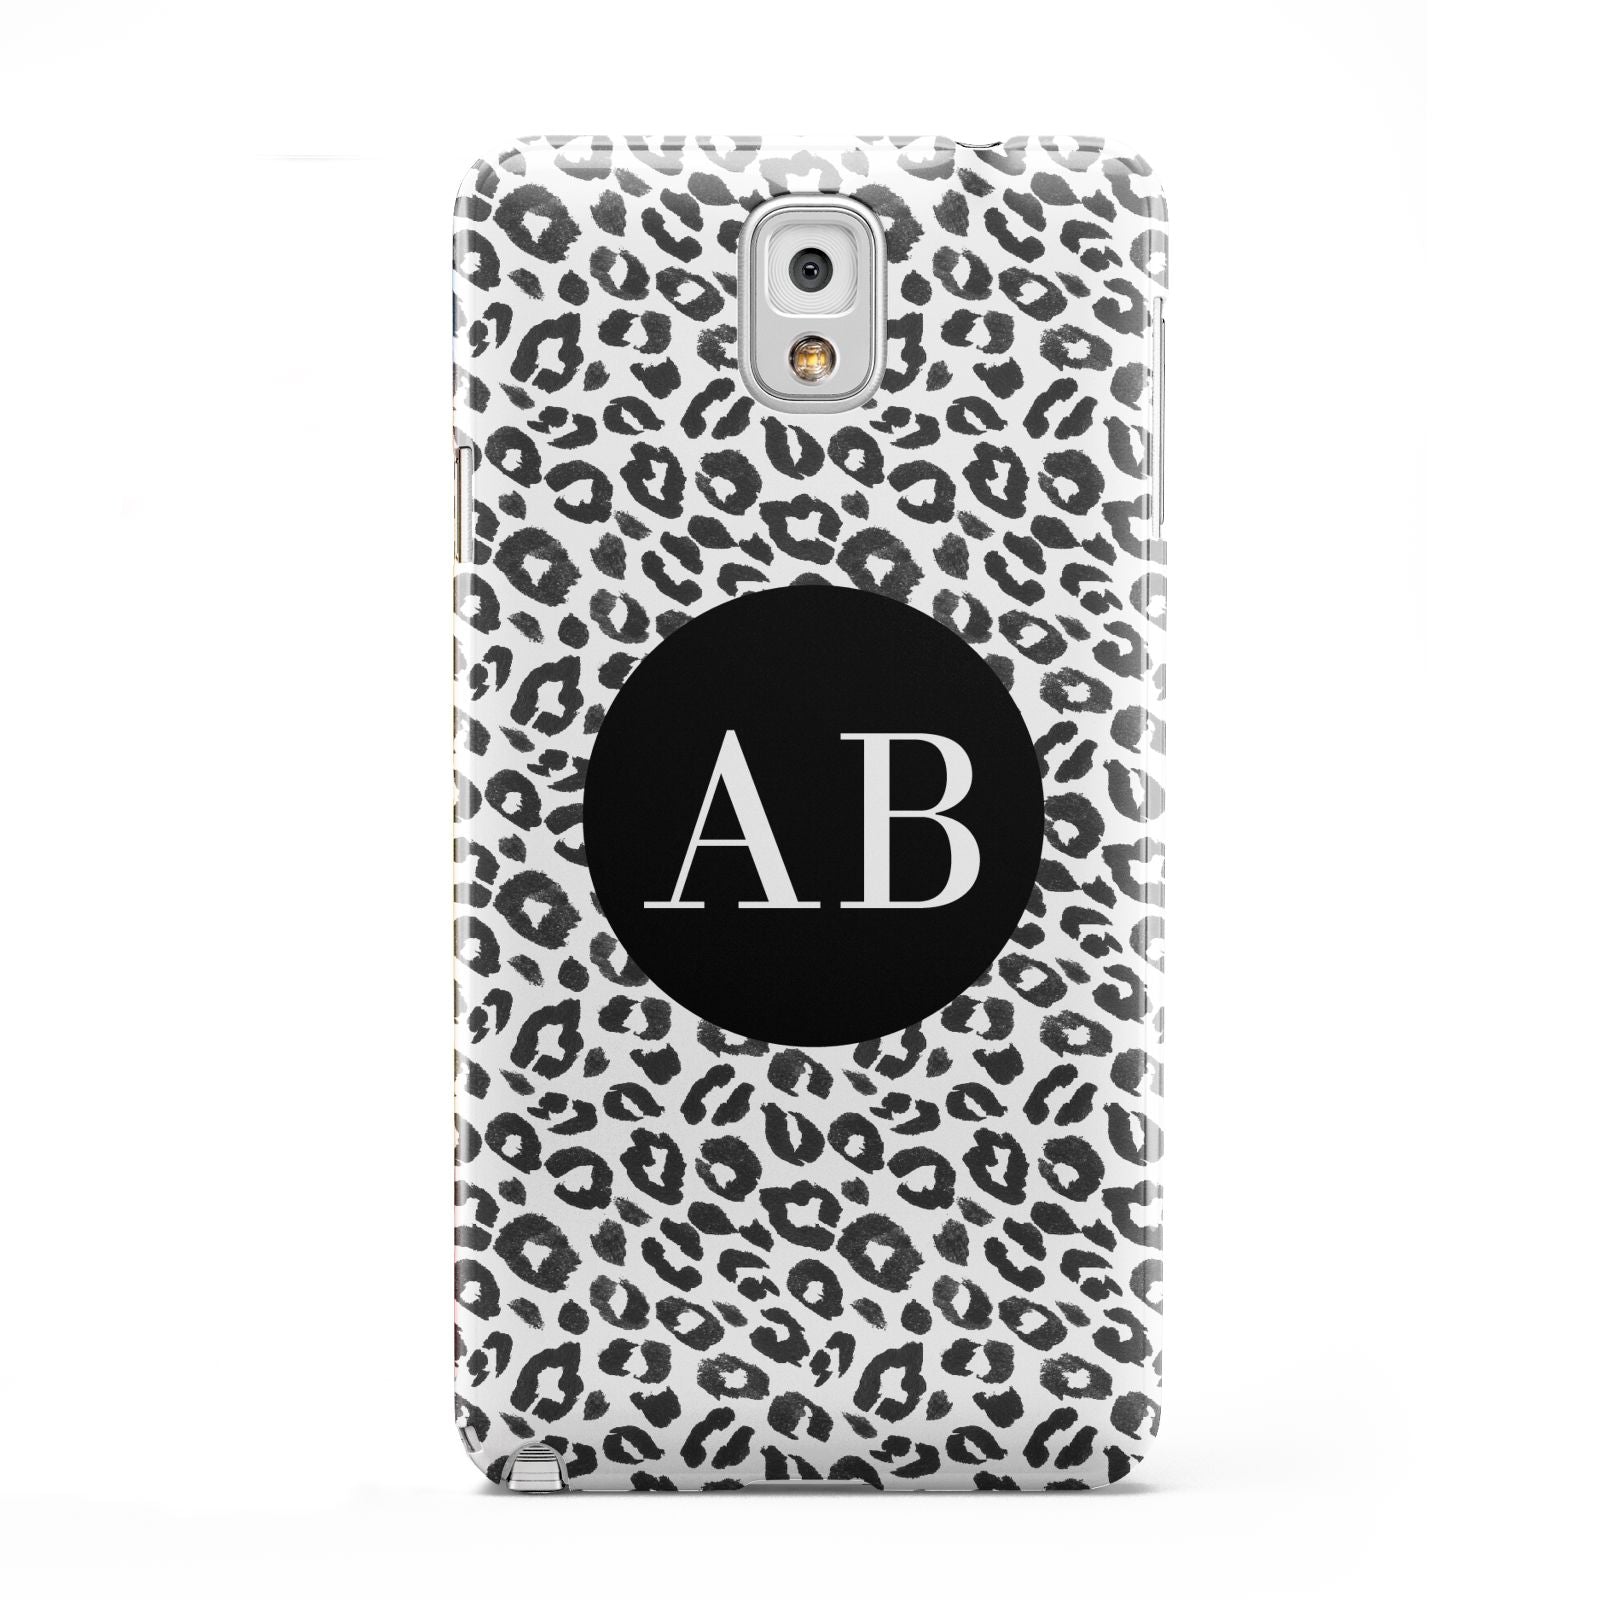 Leopard Print Black and White Samsung Galaxy Note 3 Case